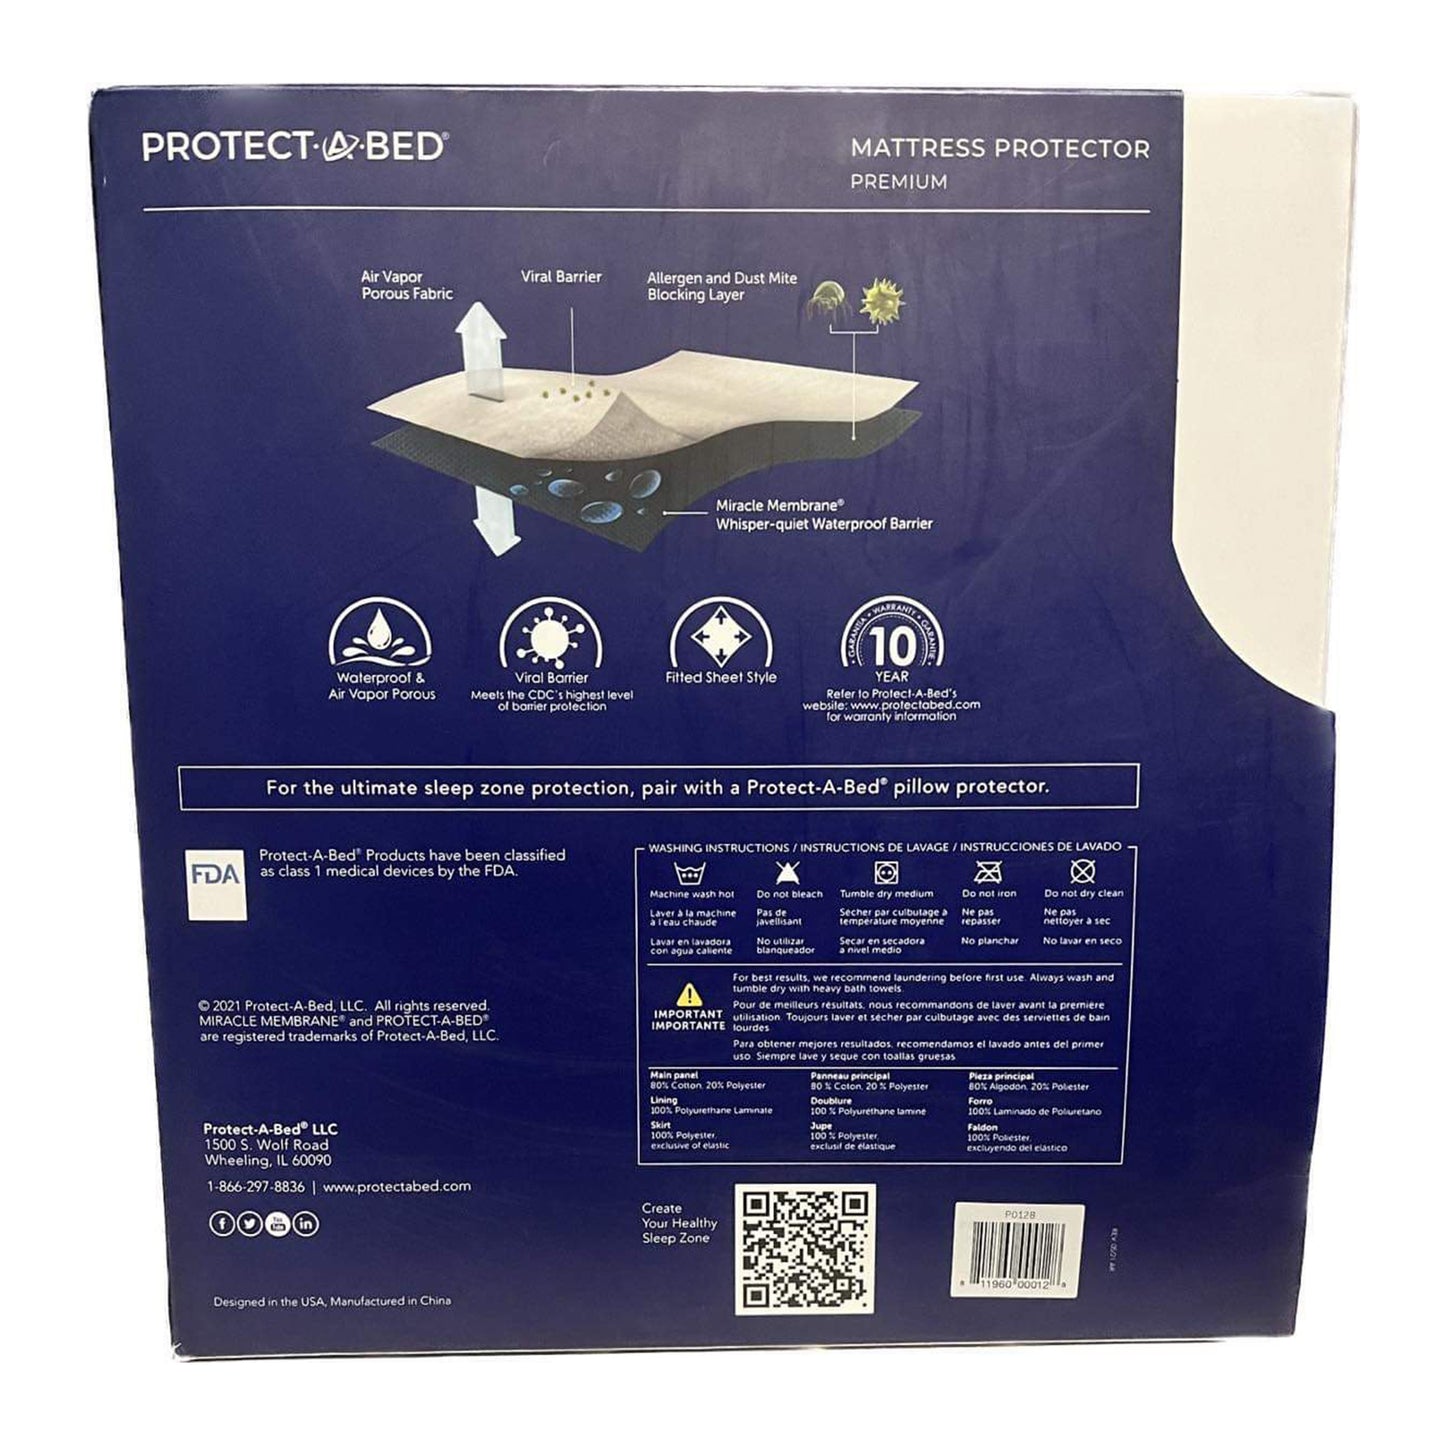 Protect-a-bed Mattress Protector